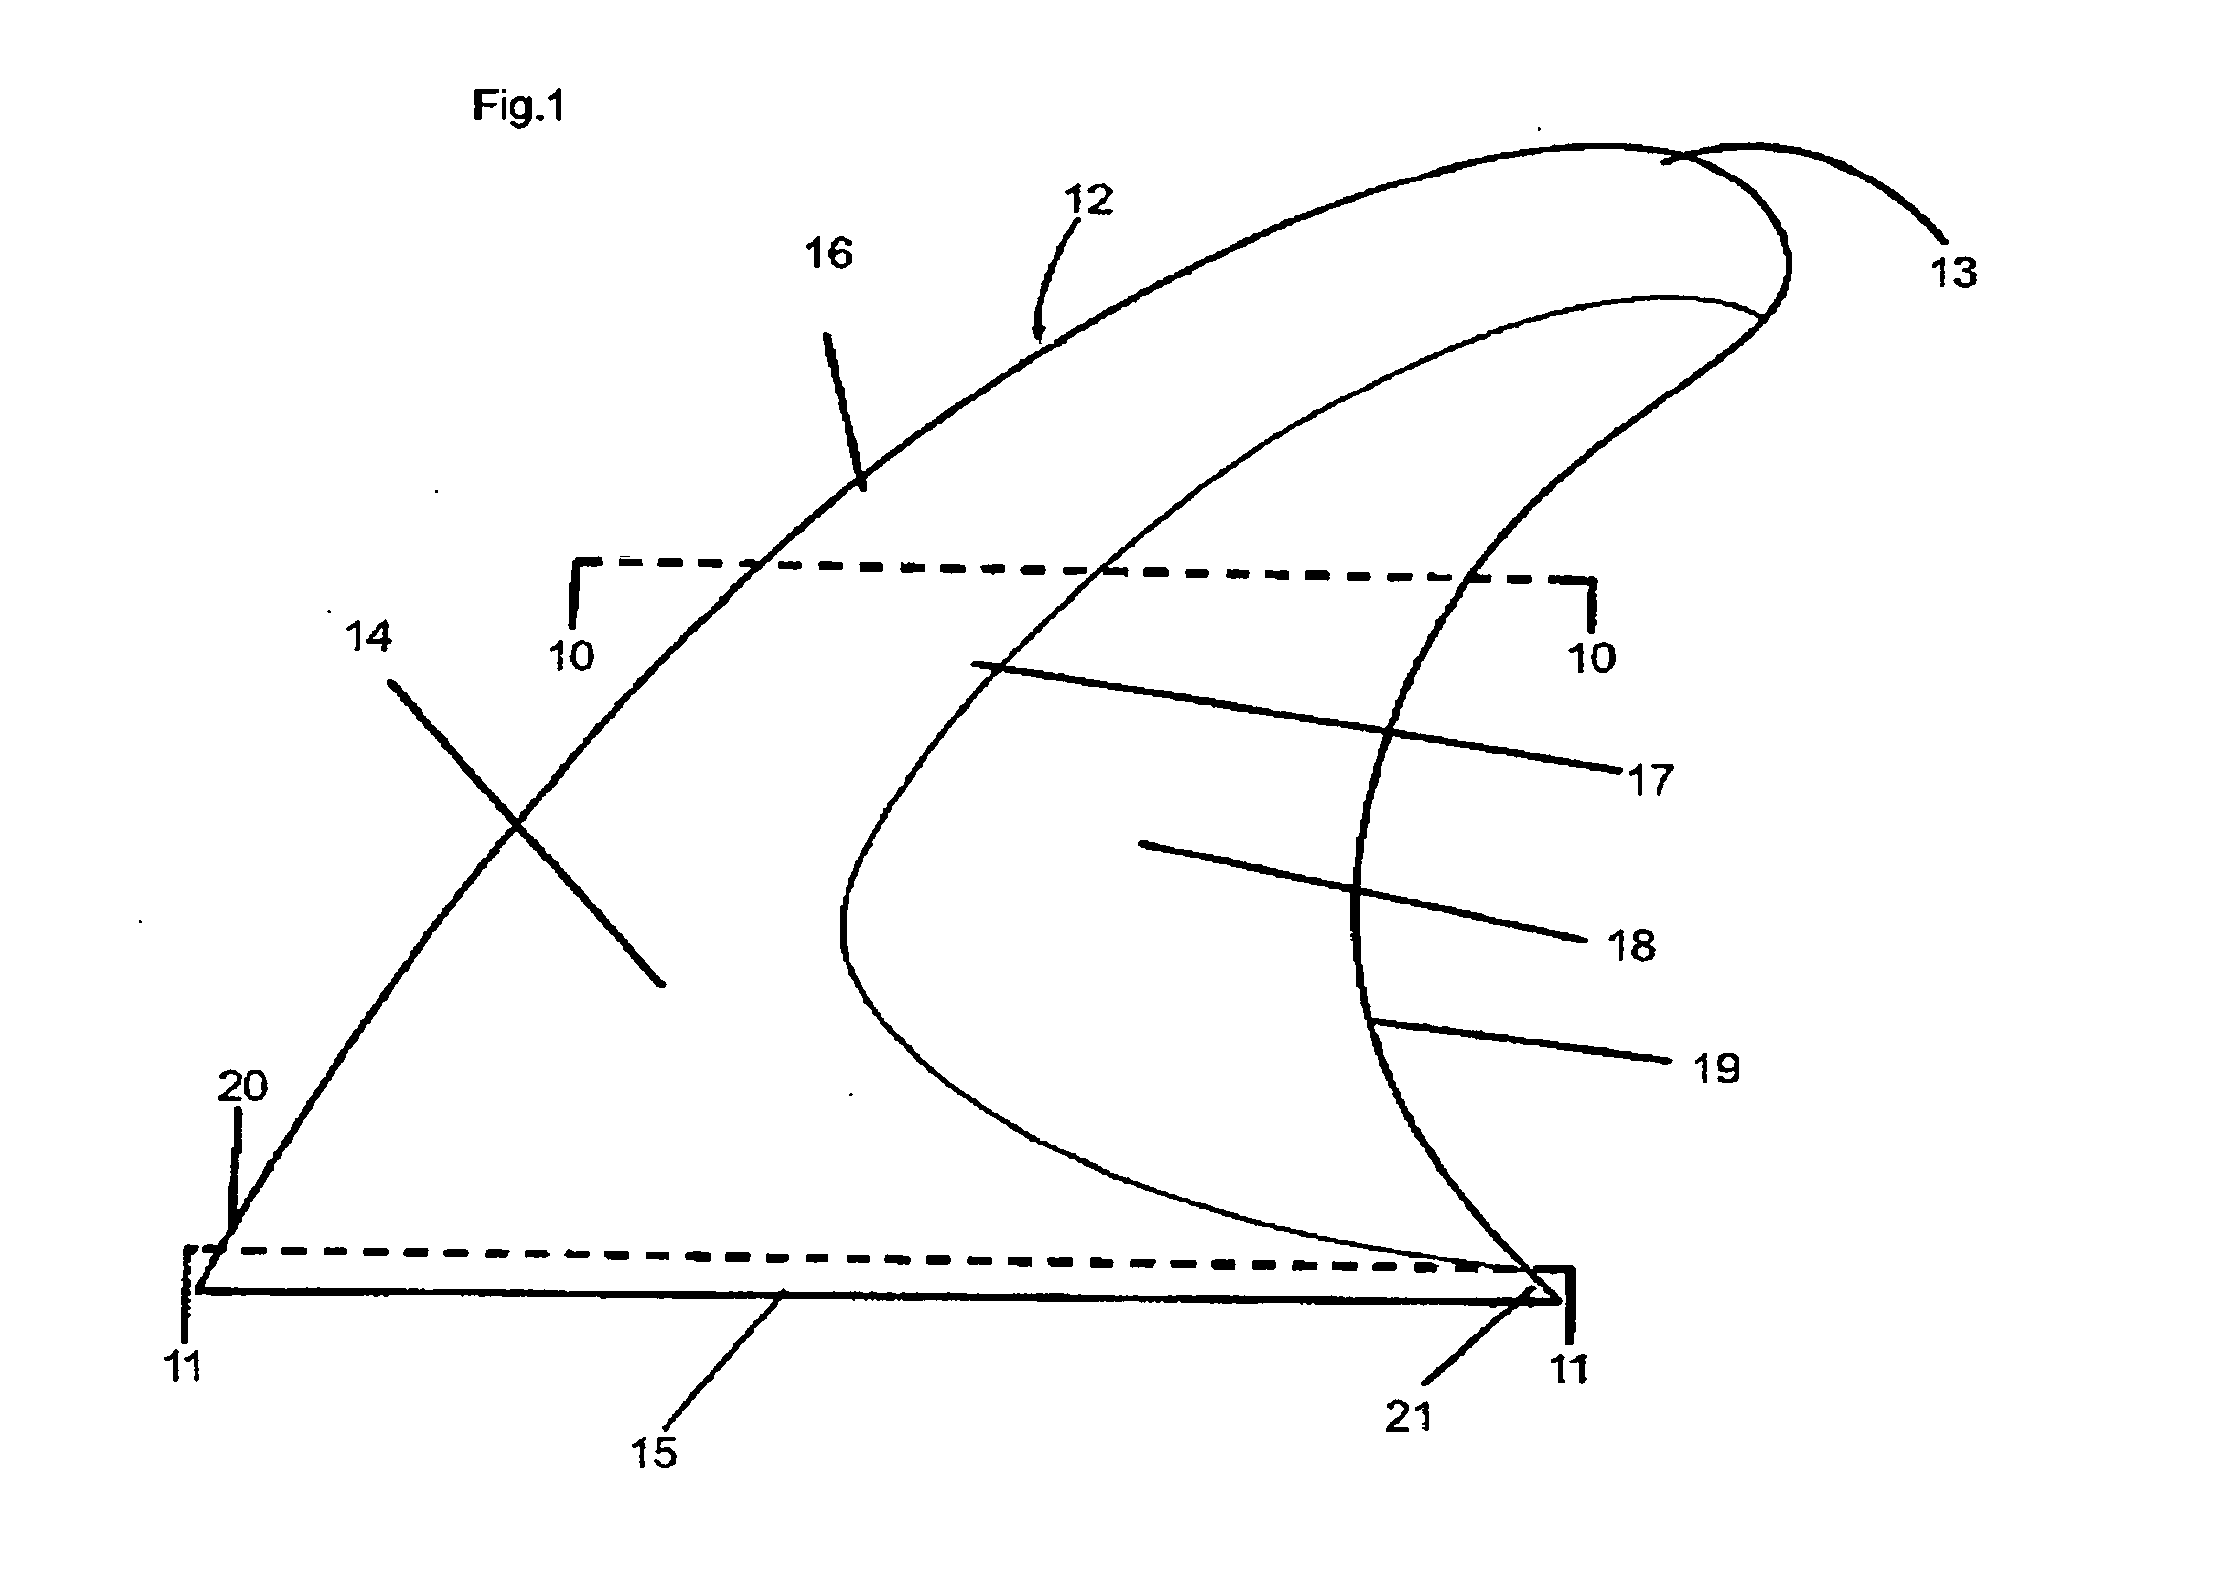 Biomimic design stabilizing fin or keel for surface planing or submerged watercraft